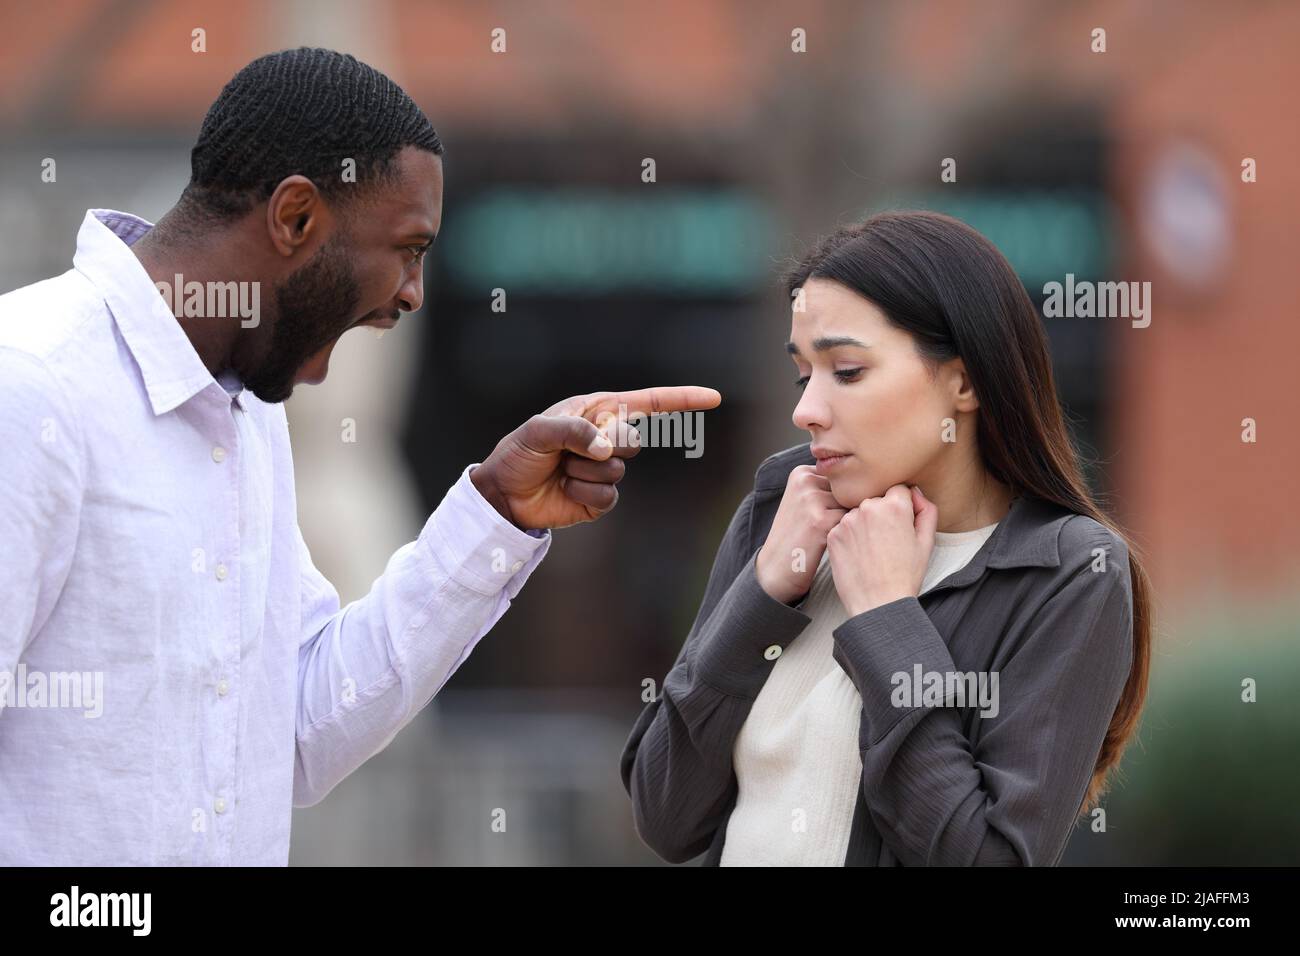 Angry man scolding and accusing to a scared woman in the street Stock Photo